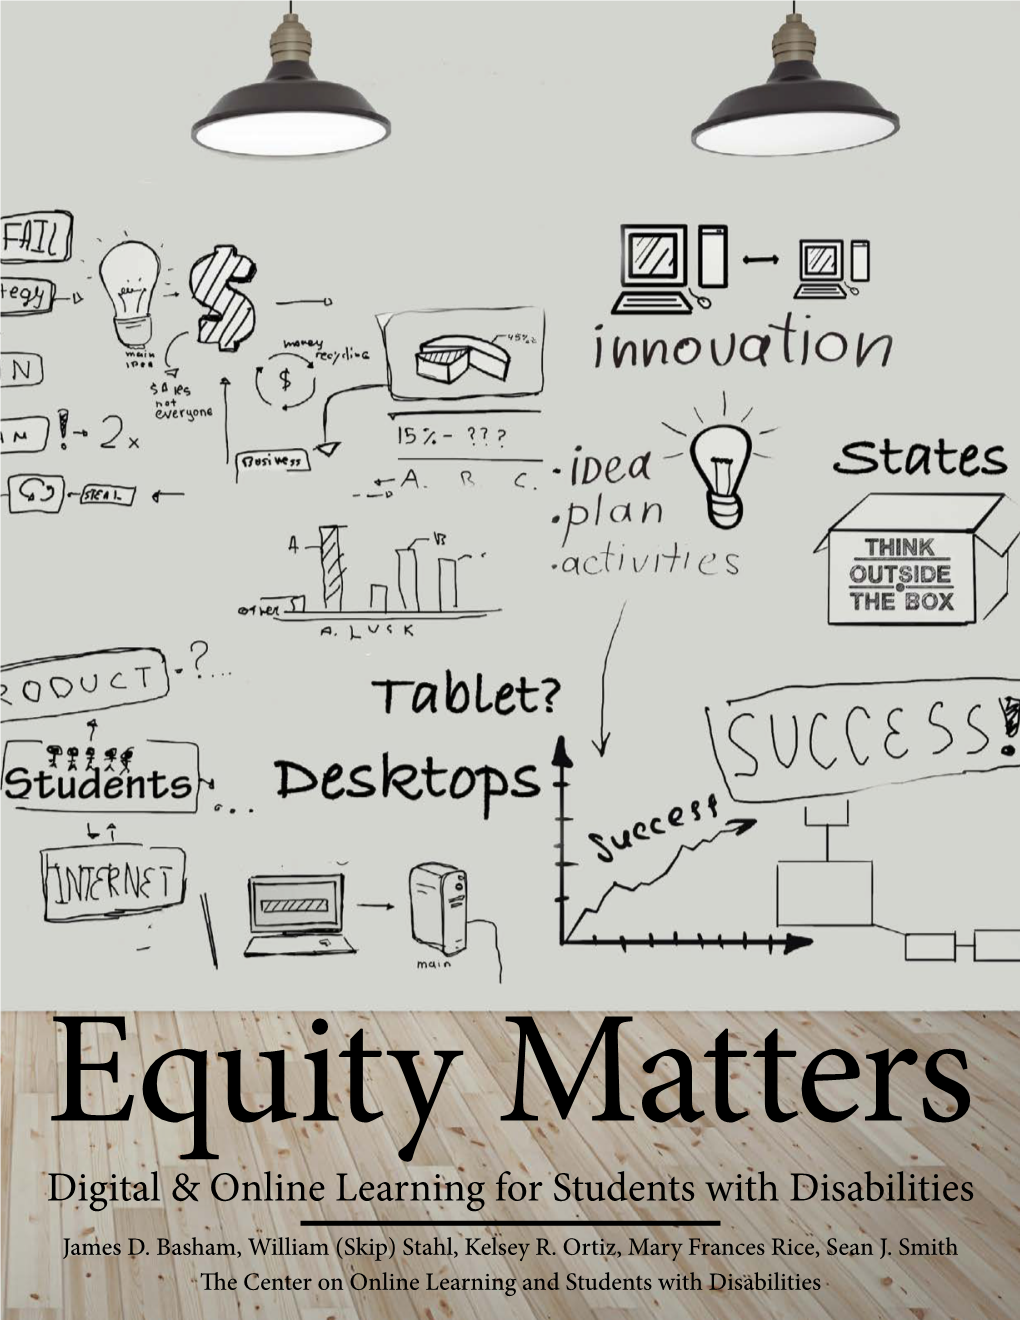 Equity Matters: Digital & Online Learning for Students with Disabilities